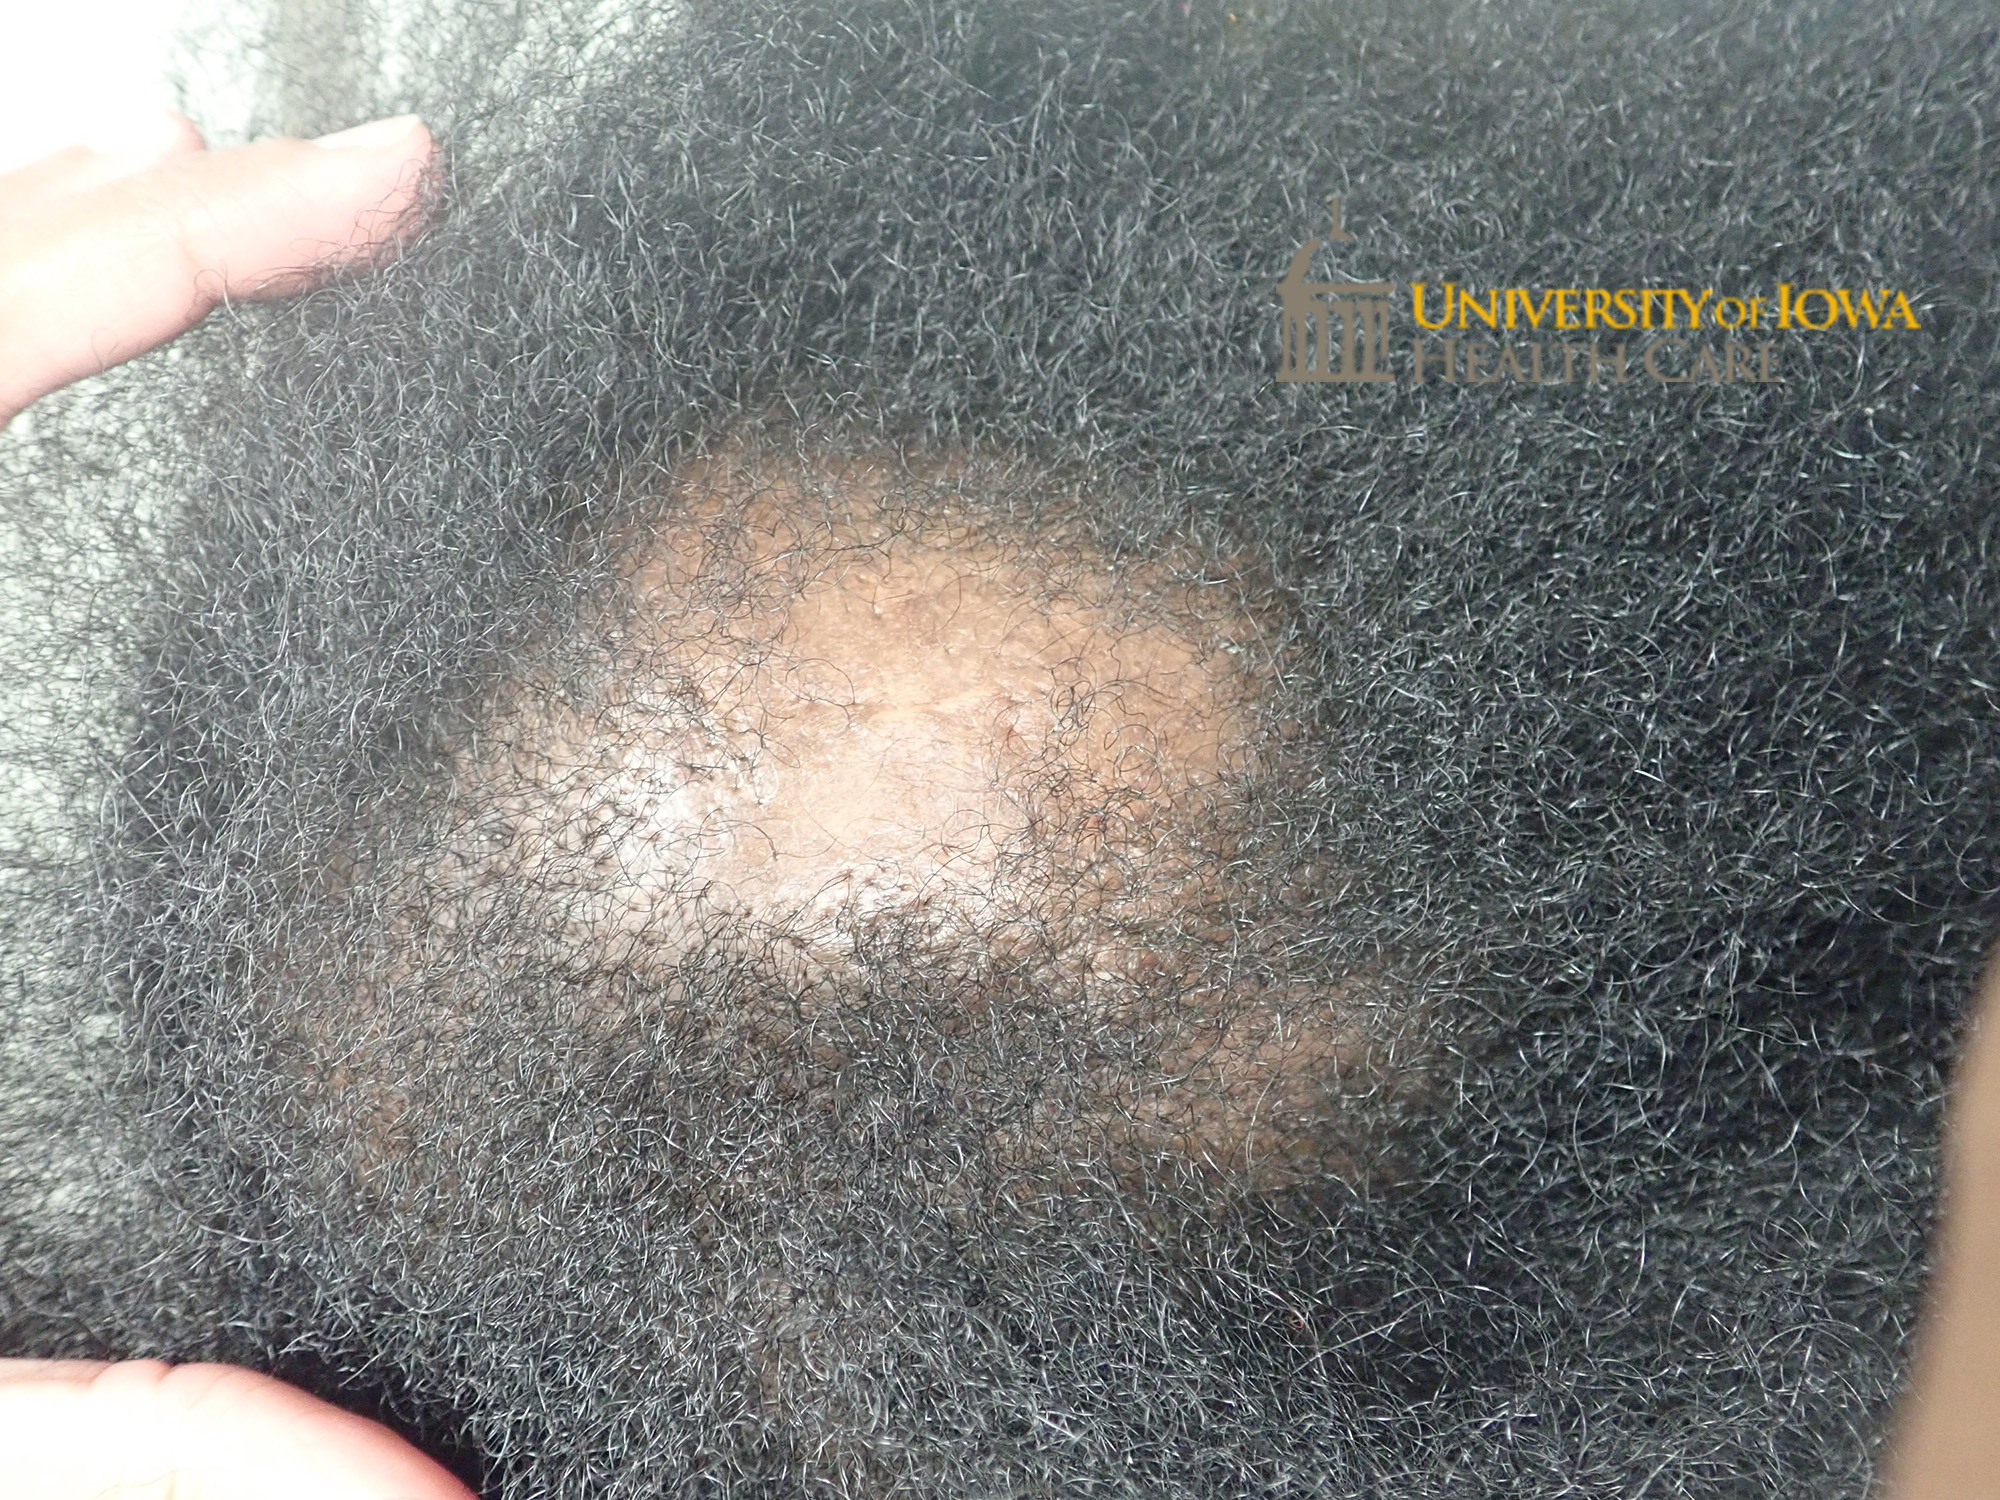 Circular patch of scarring alopecia with some retained hair follicles on the anterior scalp. (click images for higher resolution).